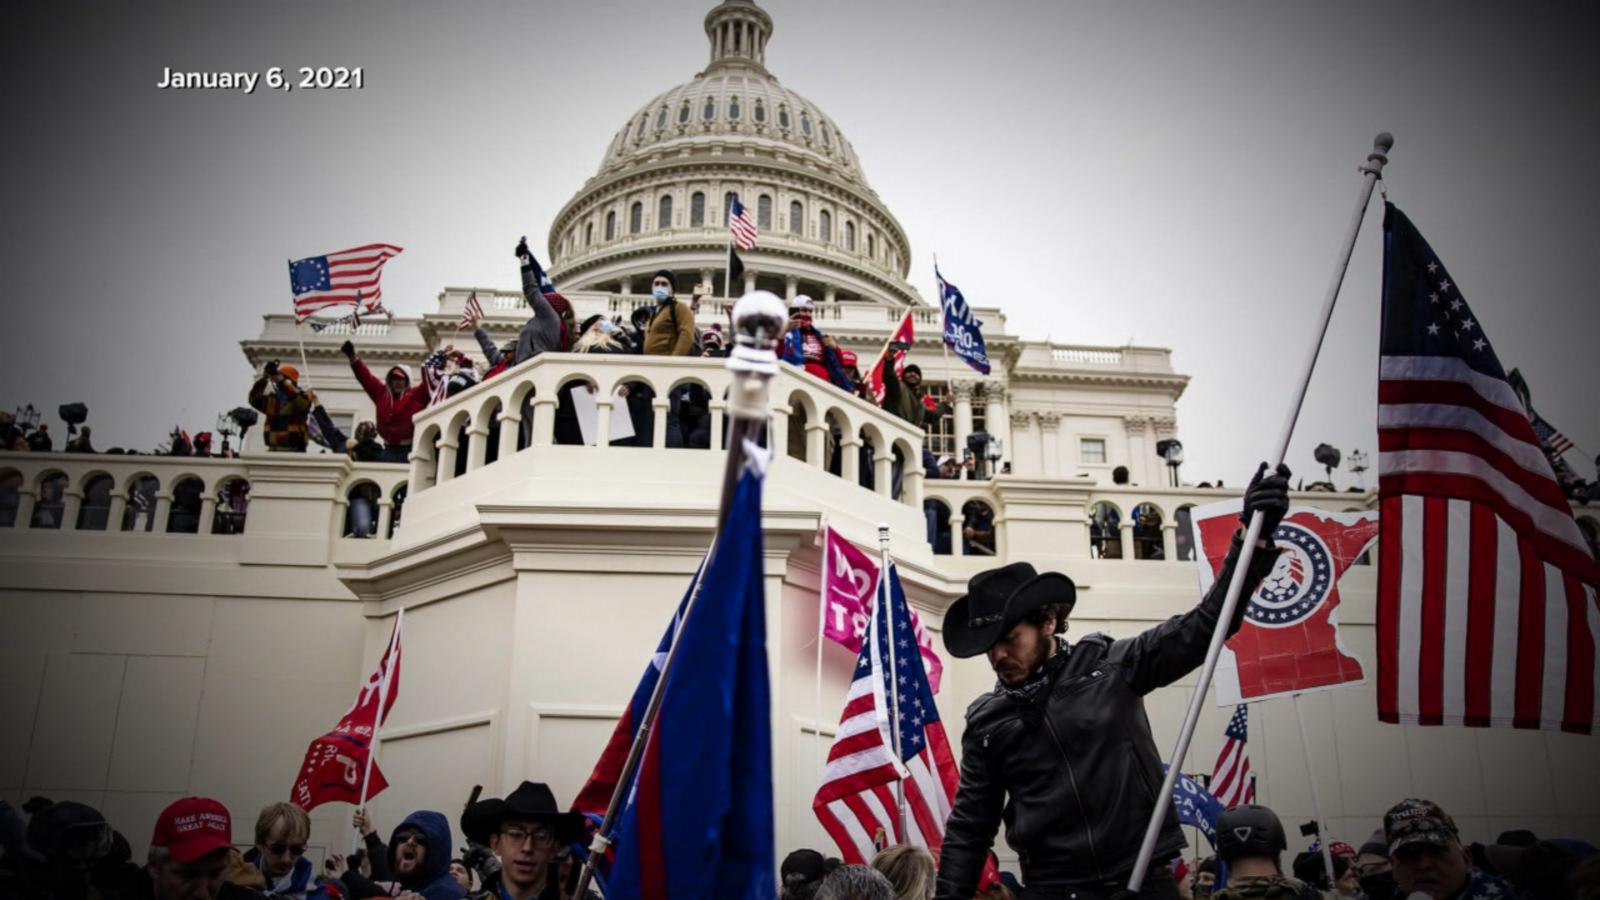 VIDEO: Supreme Court justices divided over charges against some January 6th protesters